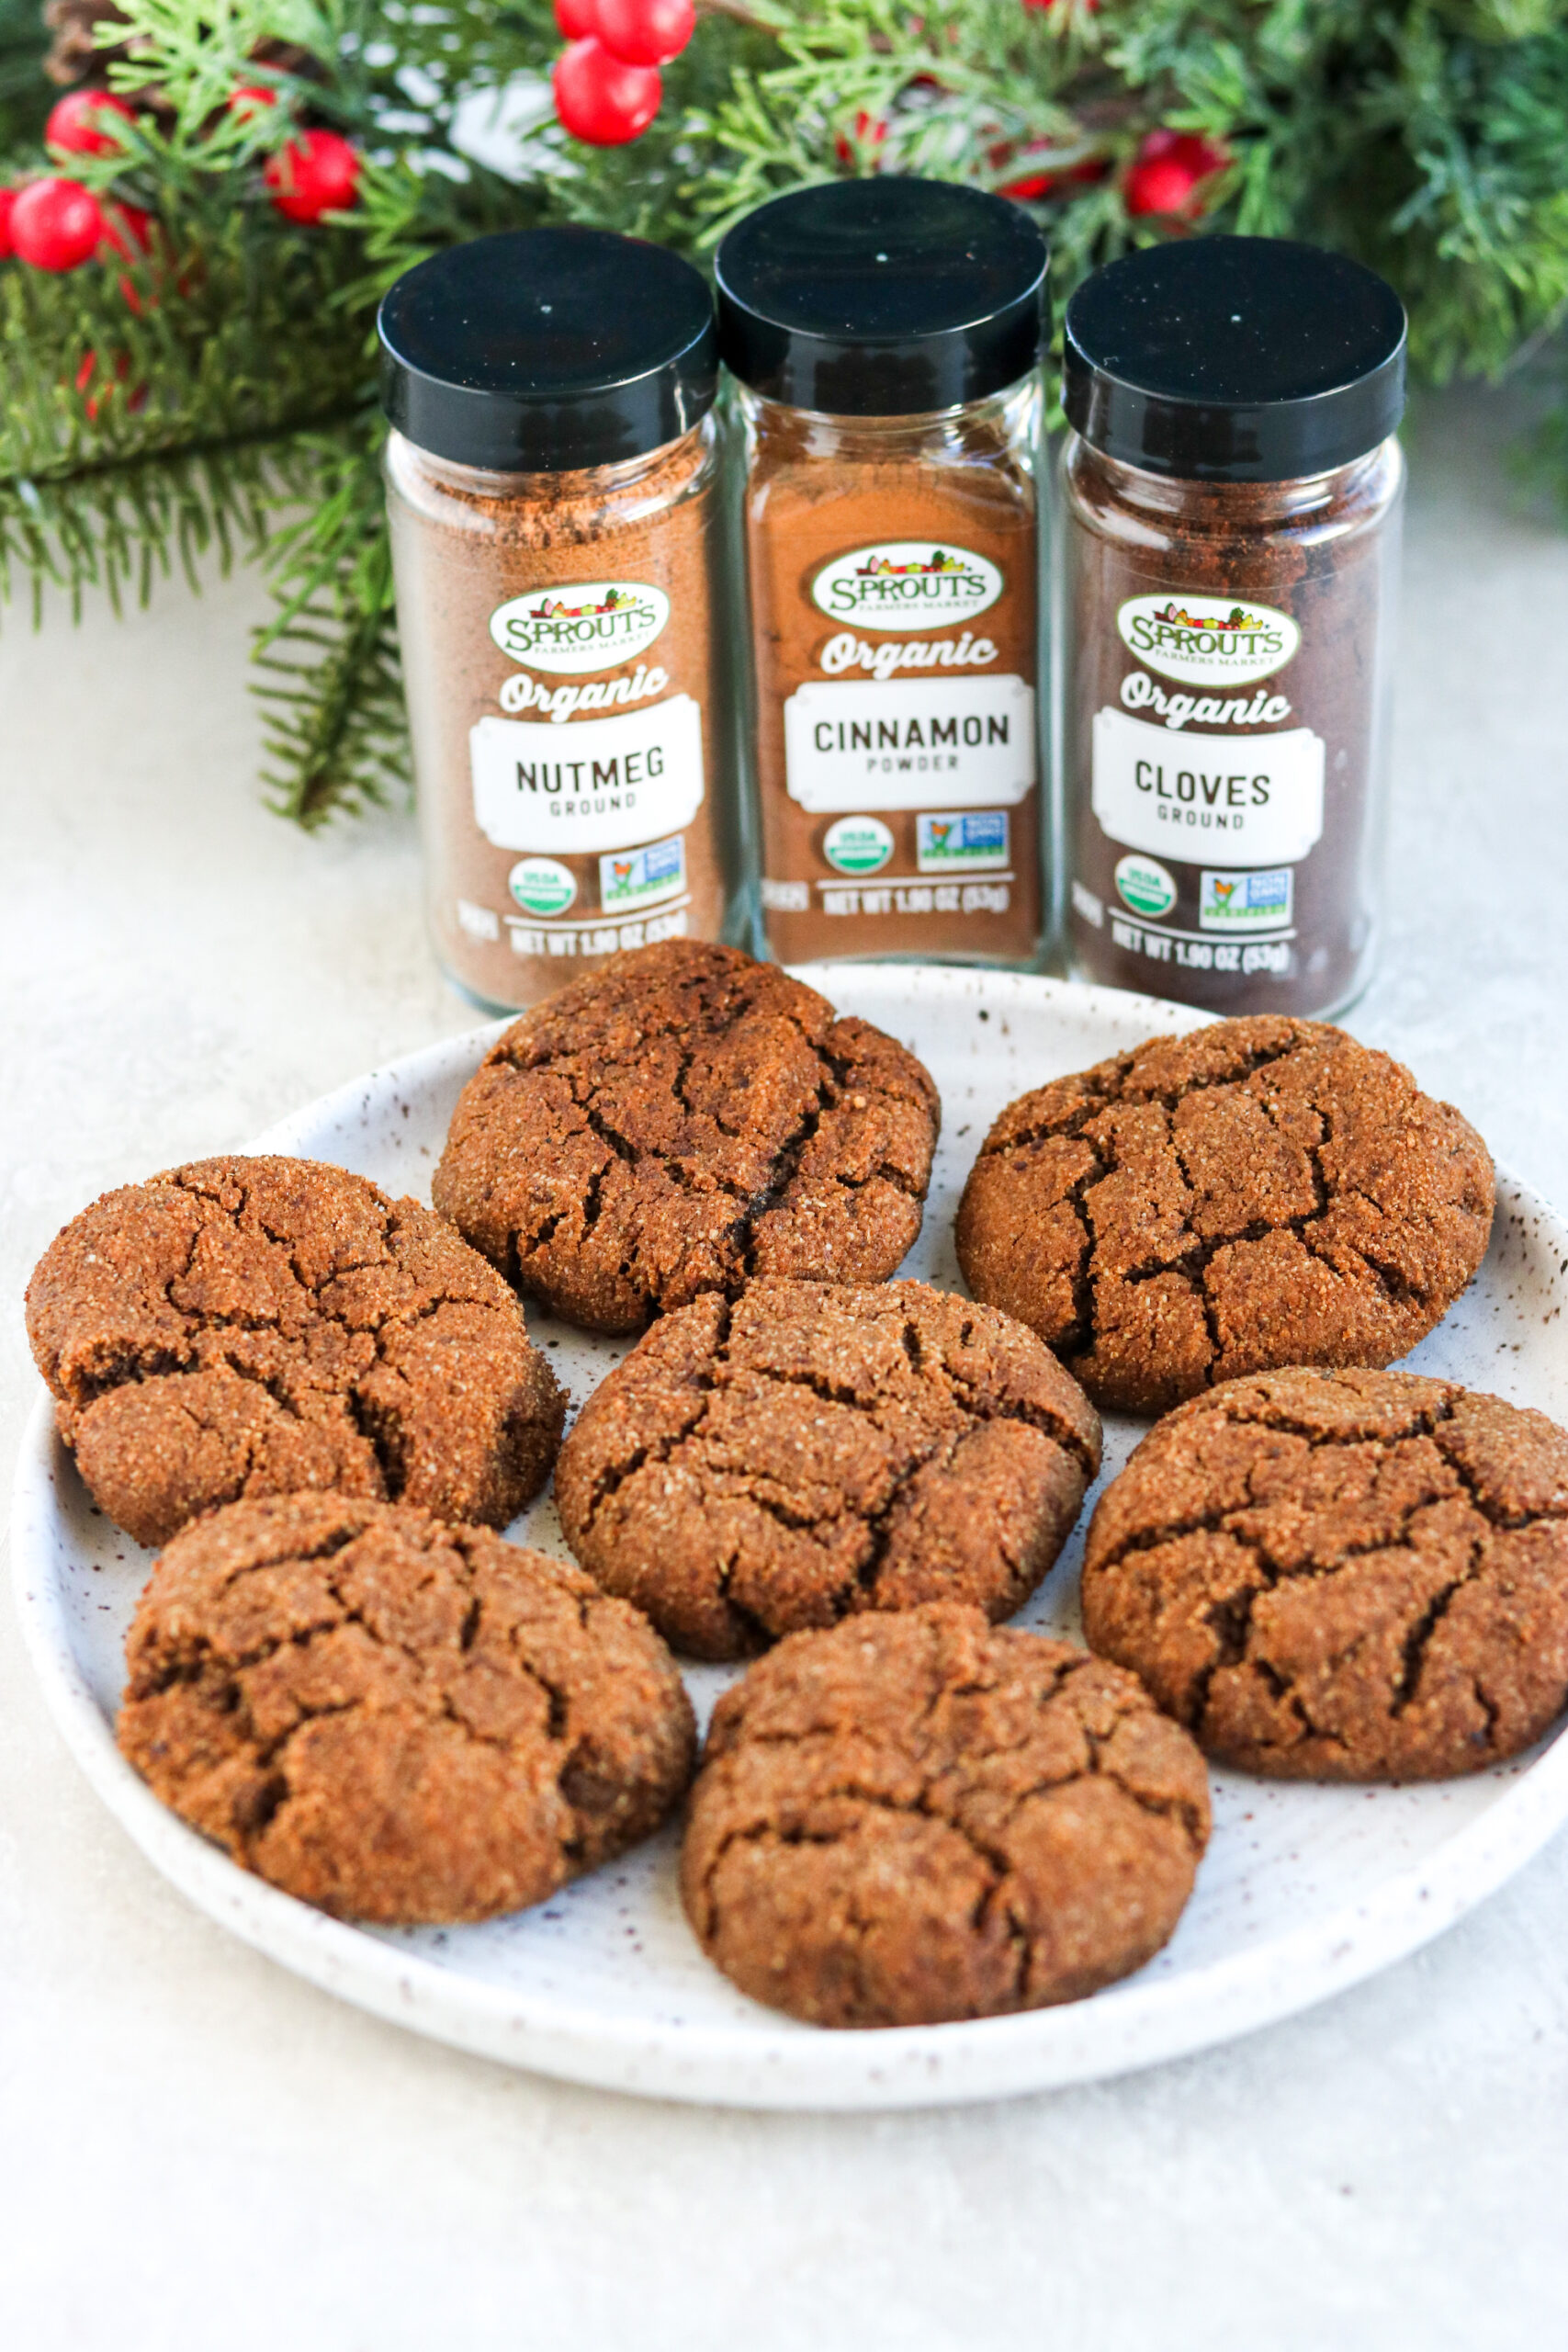 seven baked ginger cookies on a white plate with nutmeg, cinnamon, and cloves in the background